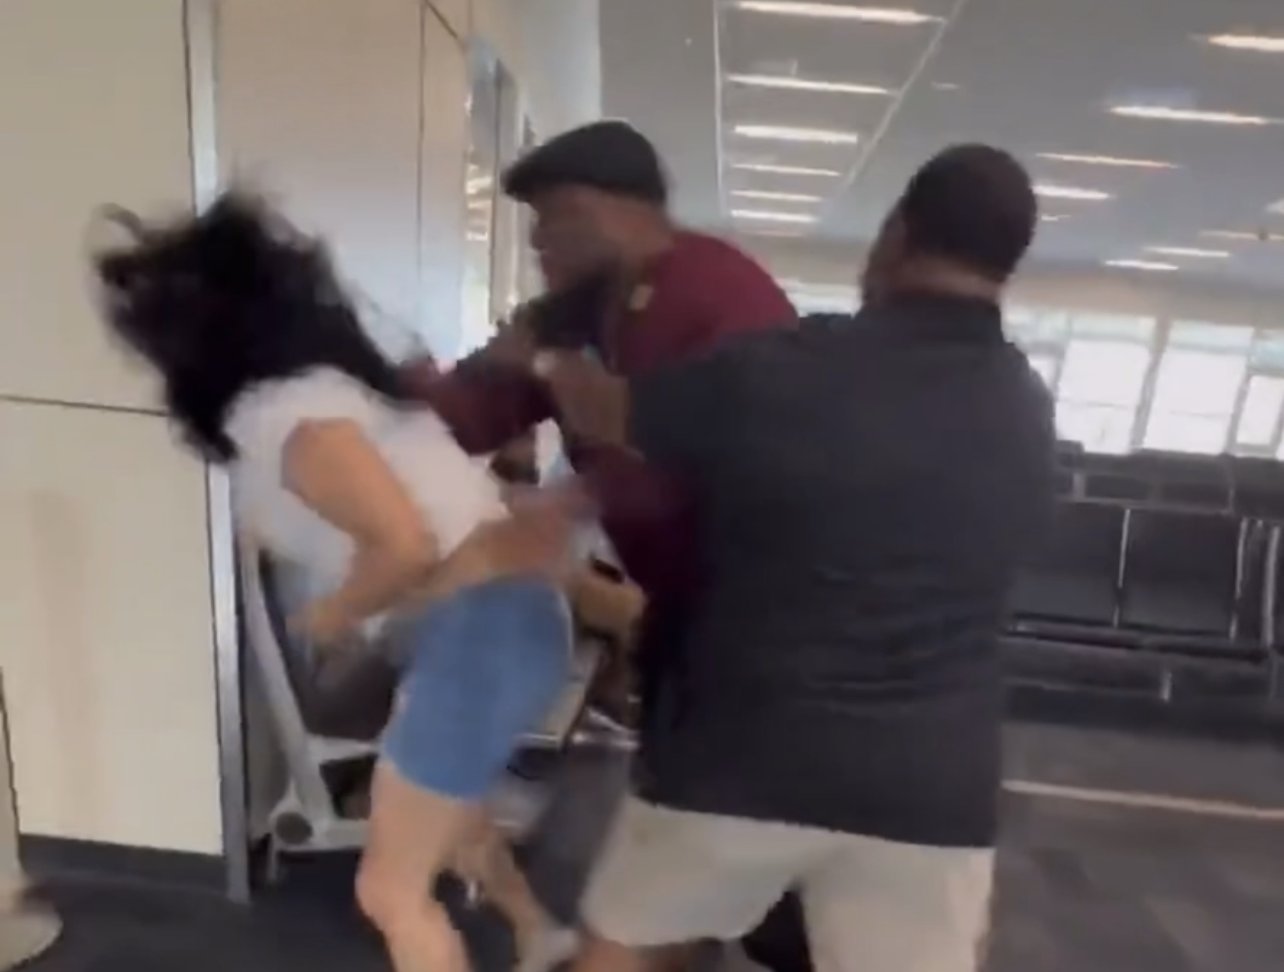 Spirit Airlines Employee Suspended For Tussling With Female Passenger In Viral Video